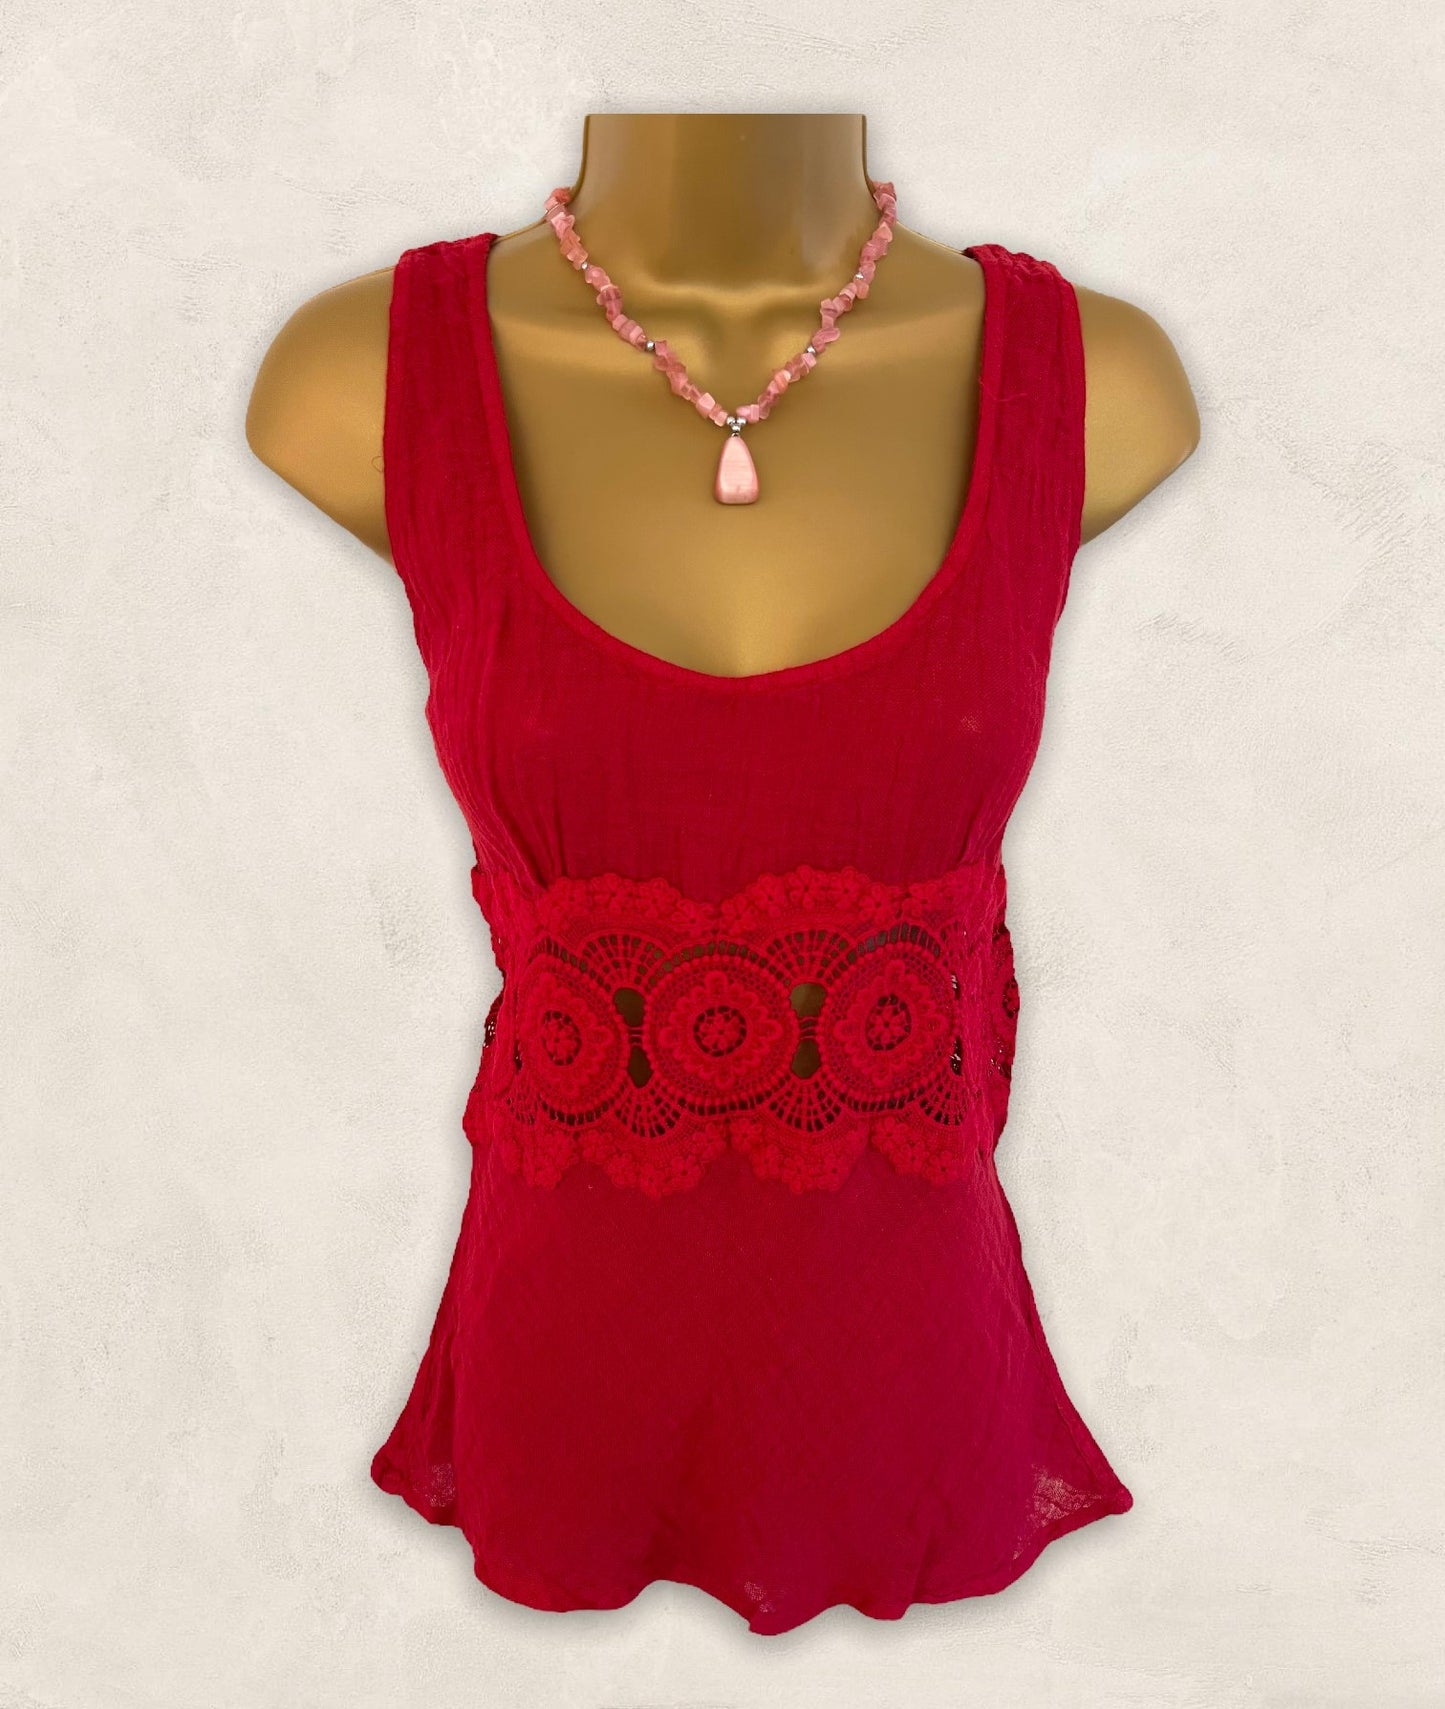 Baby Ceylon Womens Red Linen Cut Out Lace Sleeveless Top UK 12 US 8 EU 40 Timeless Fashions